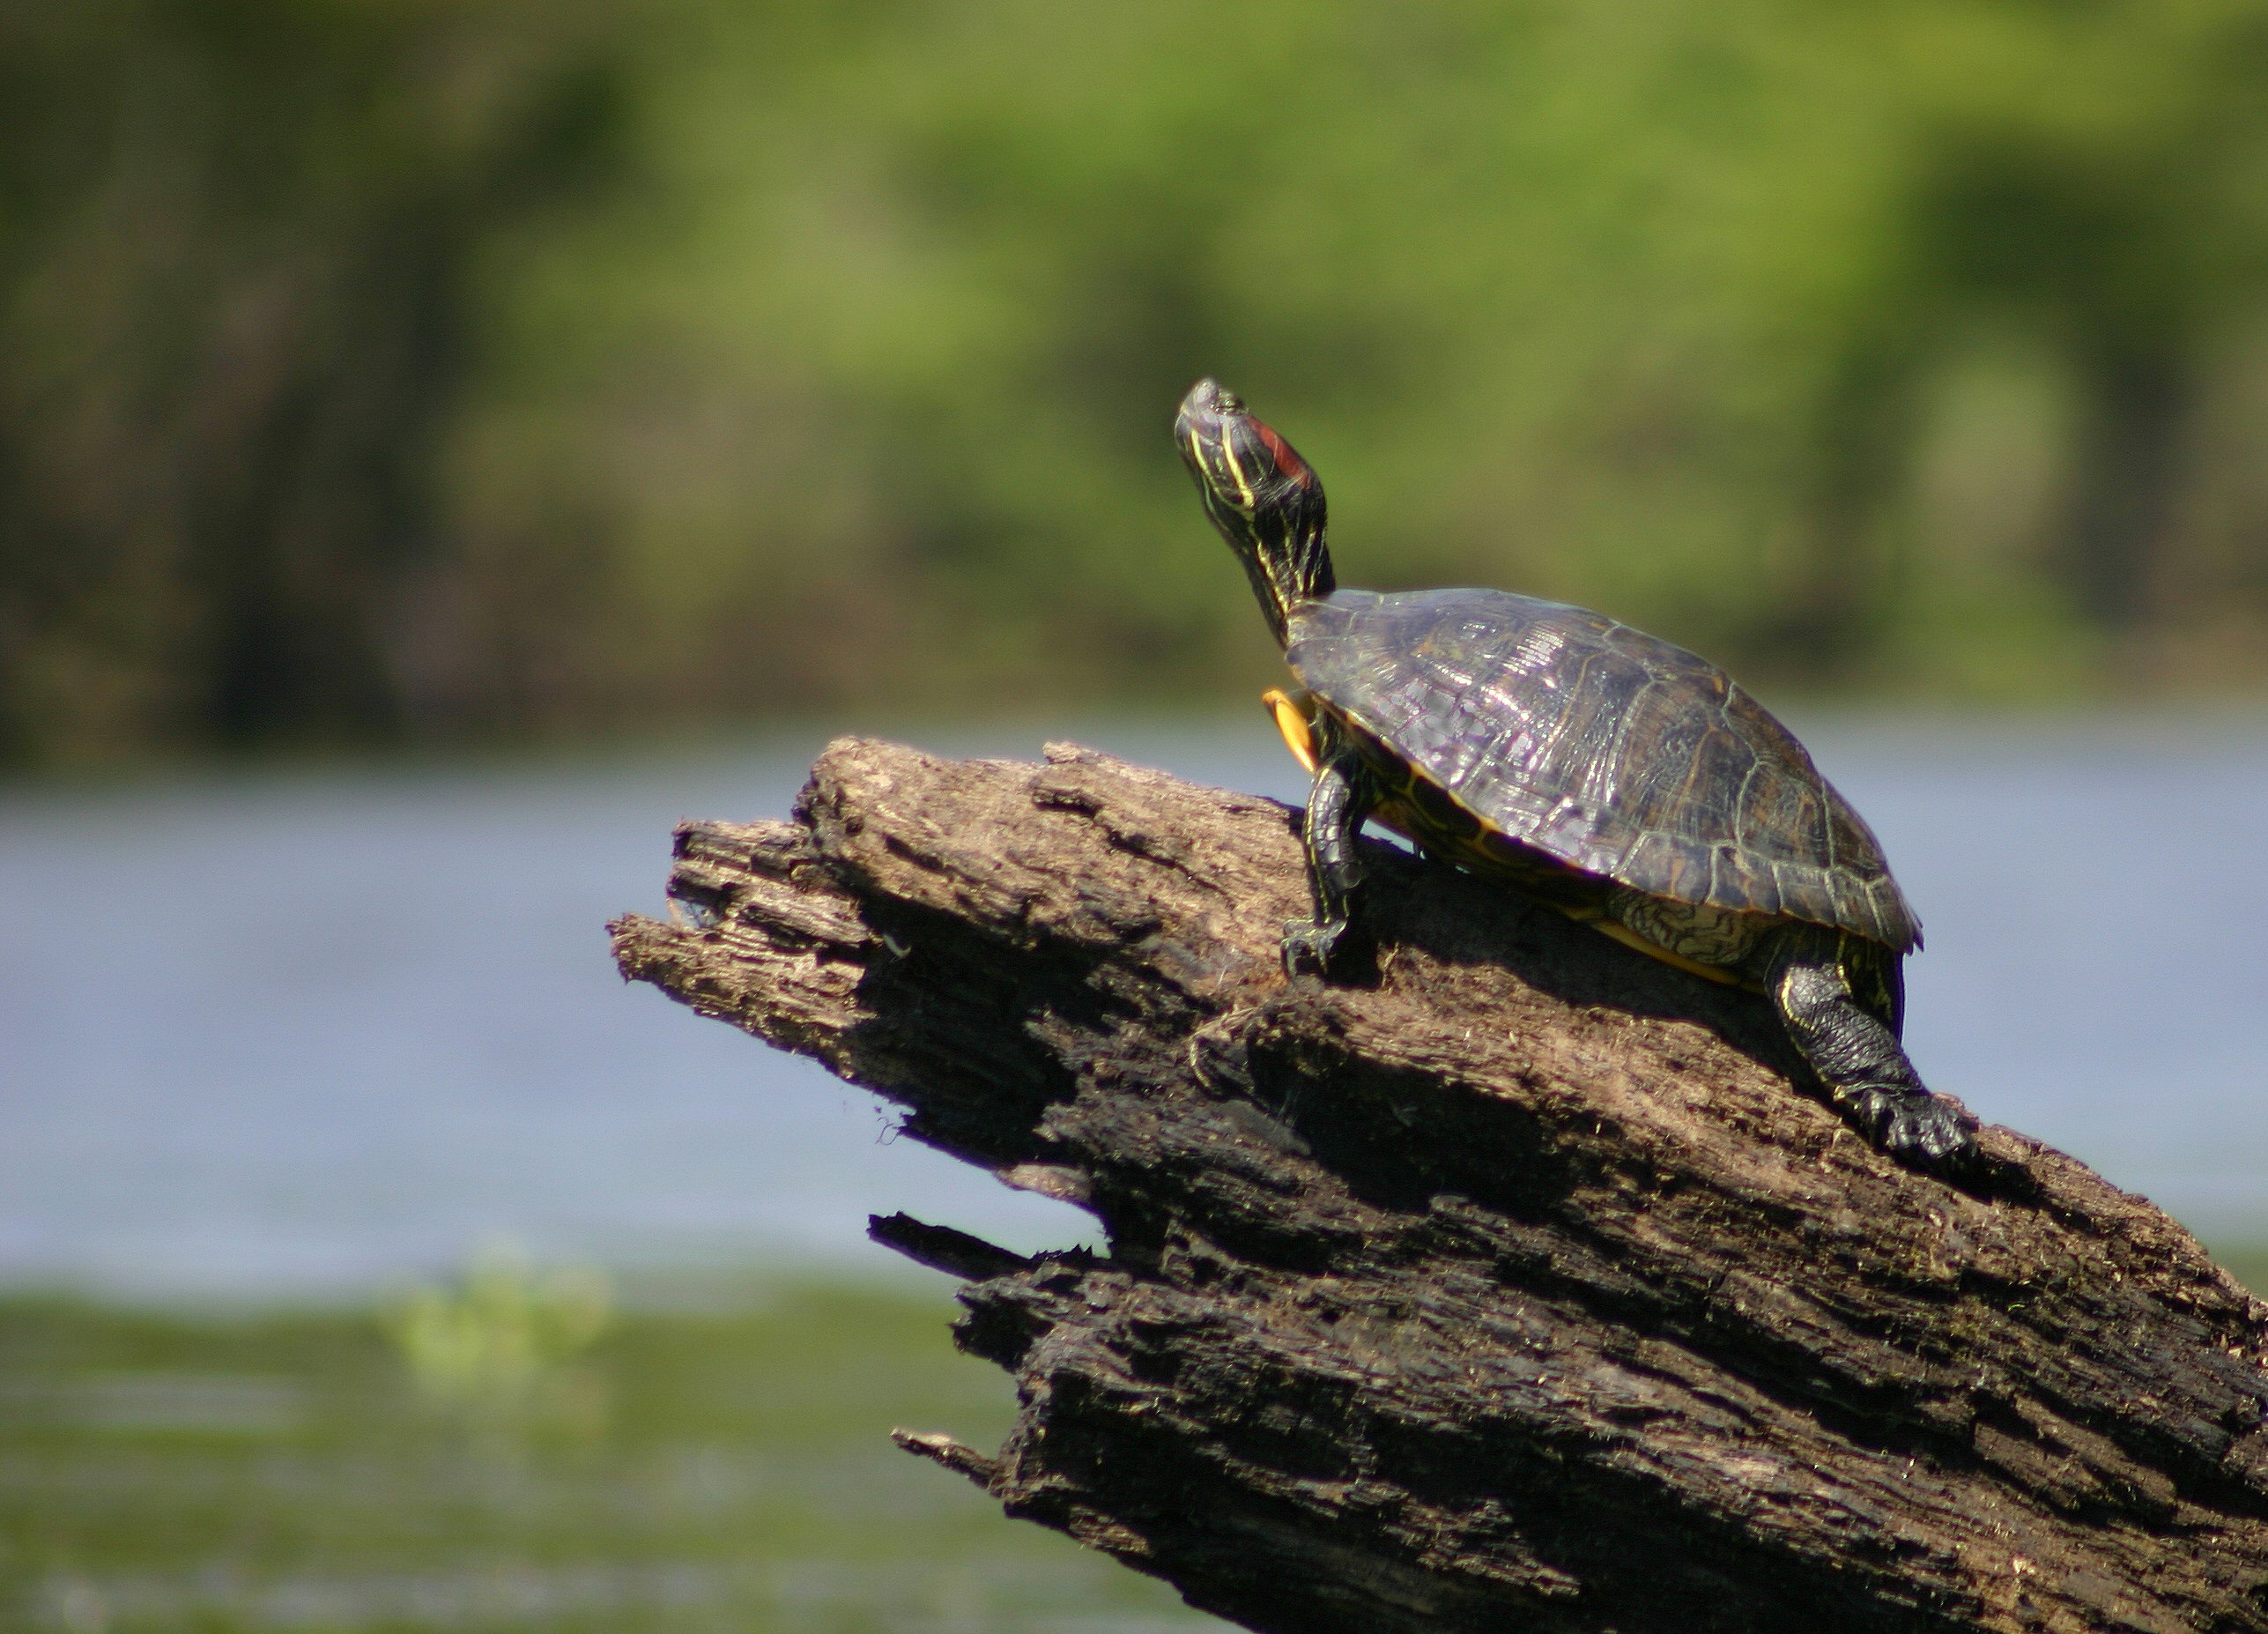 Sideway view of a turtle on a log, looking up.